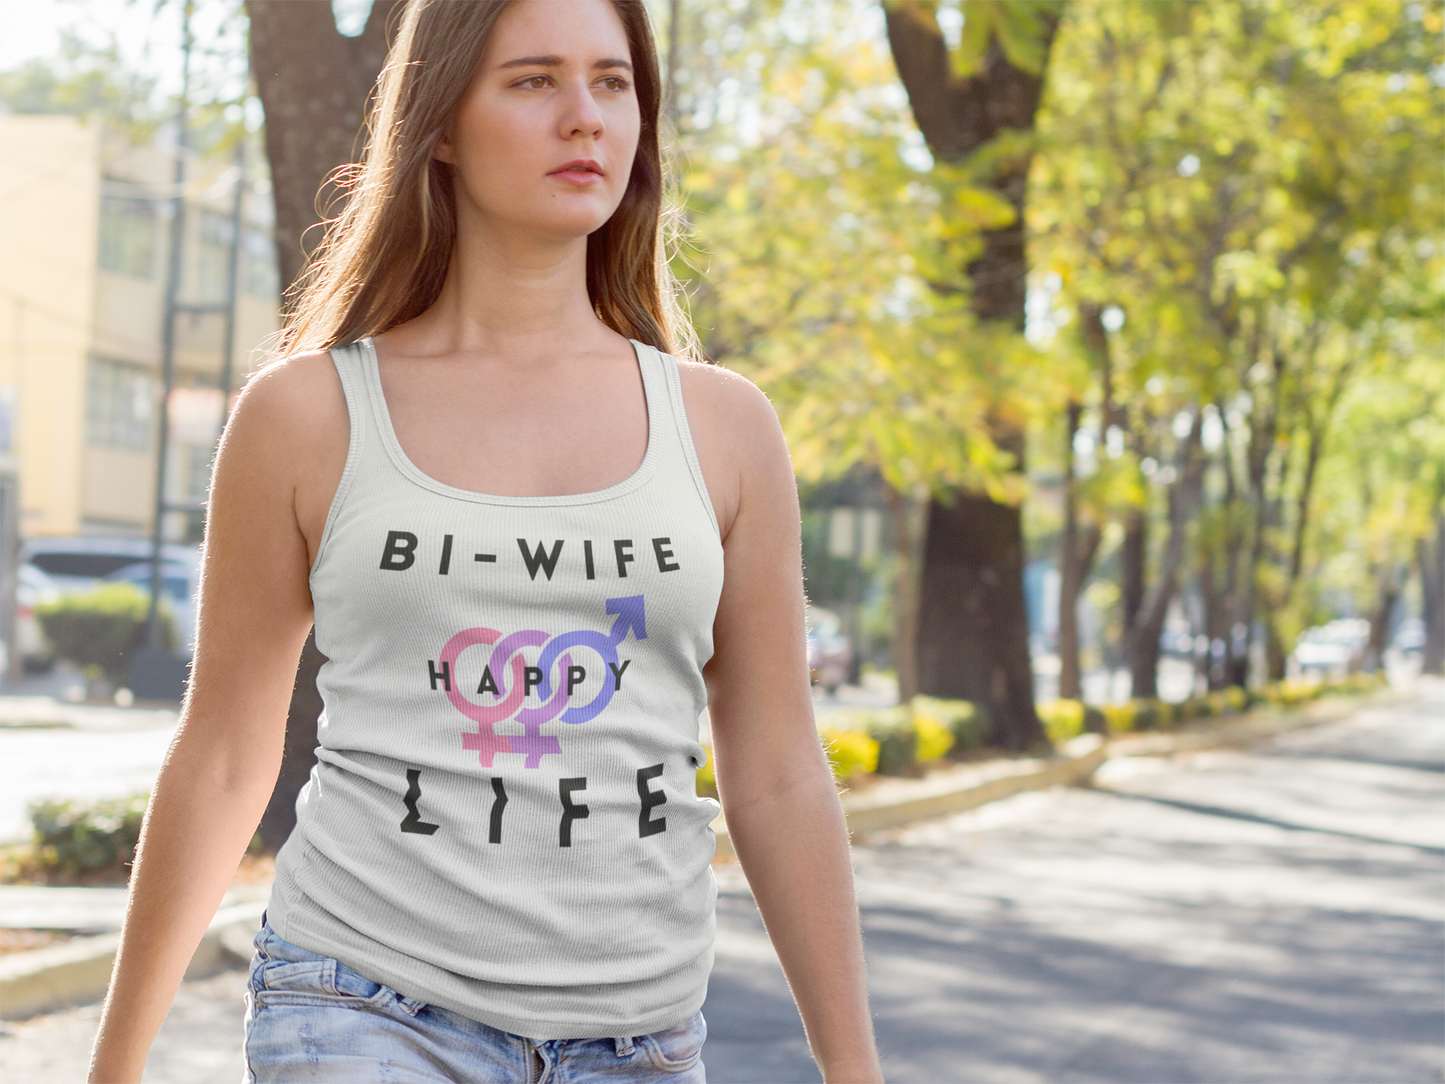 Attractive White Woman wearing Layne Studios "Bi-Wife Happy Life" Graphic Solid White Tank-Top